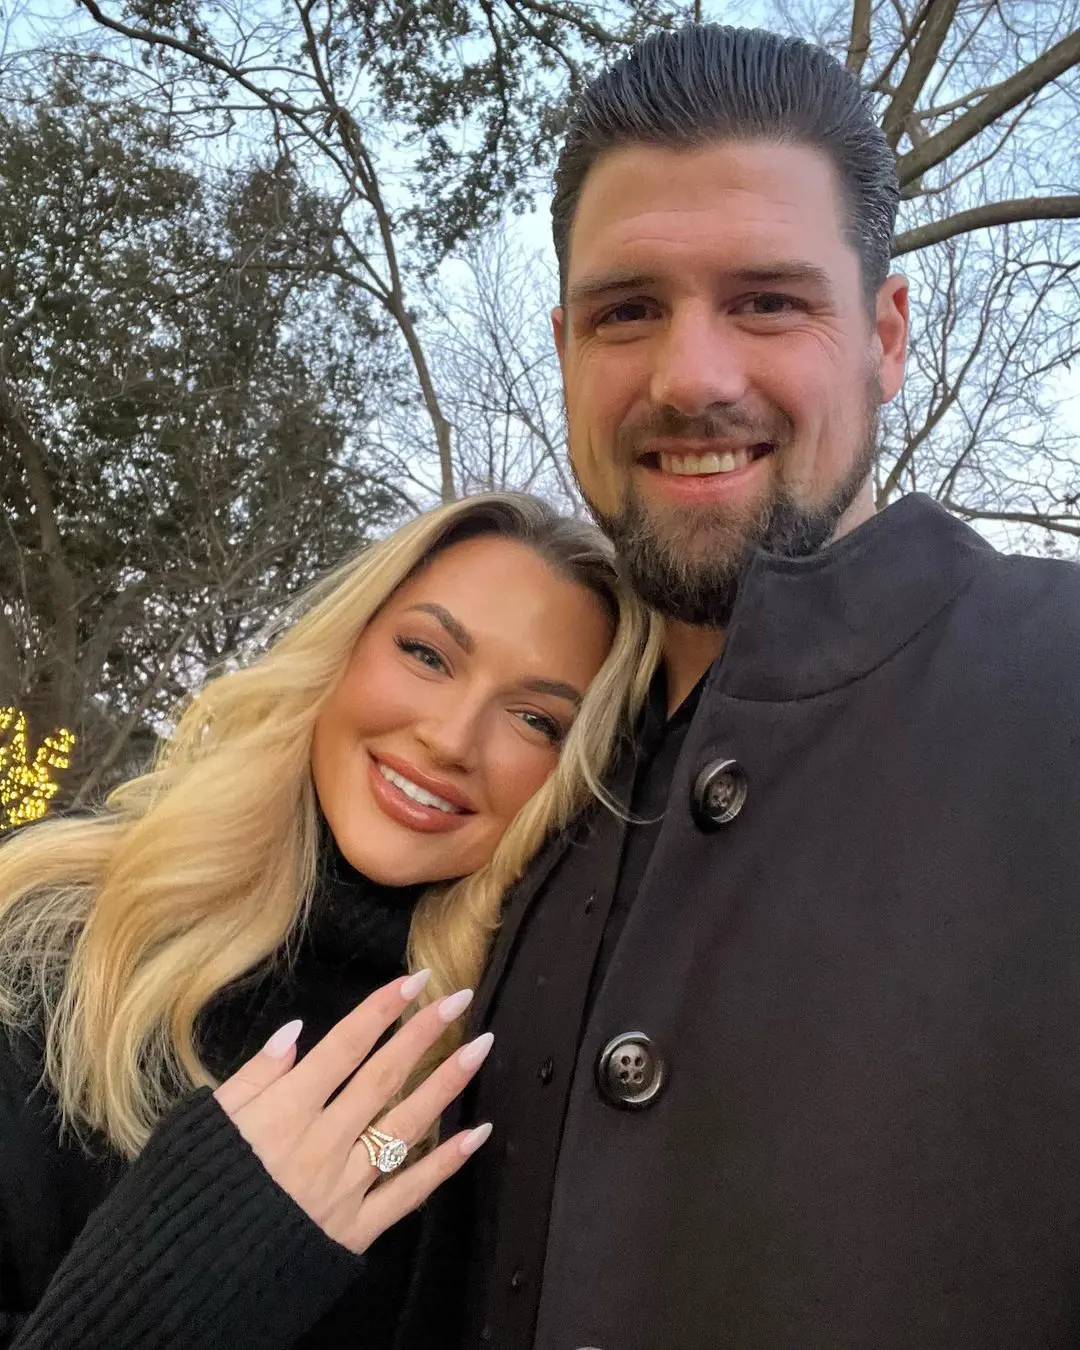 Jamie and Jessica are now engaged.